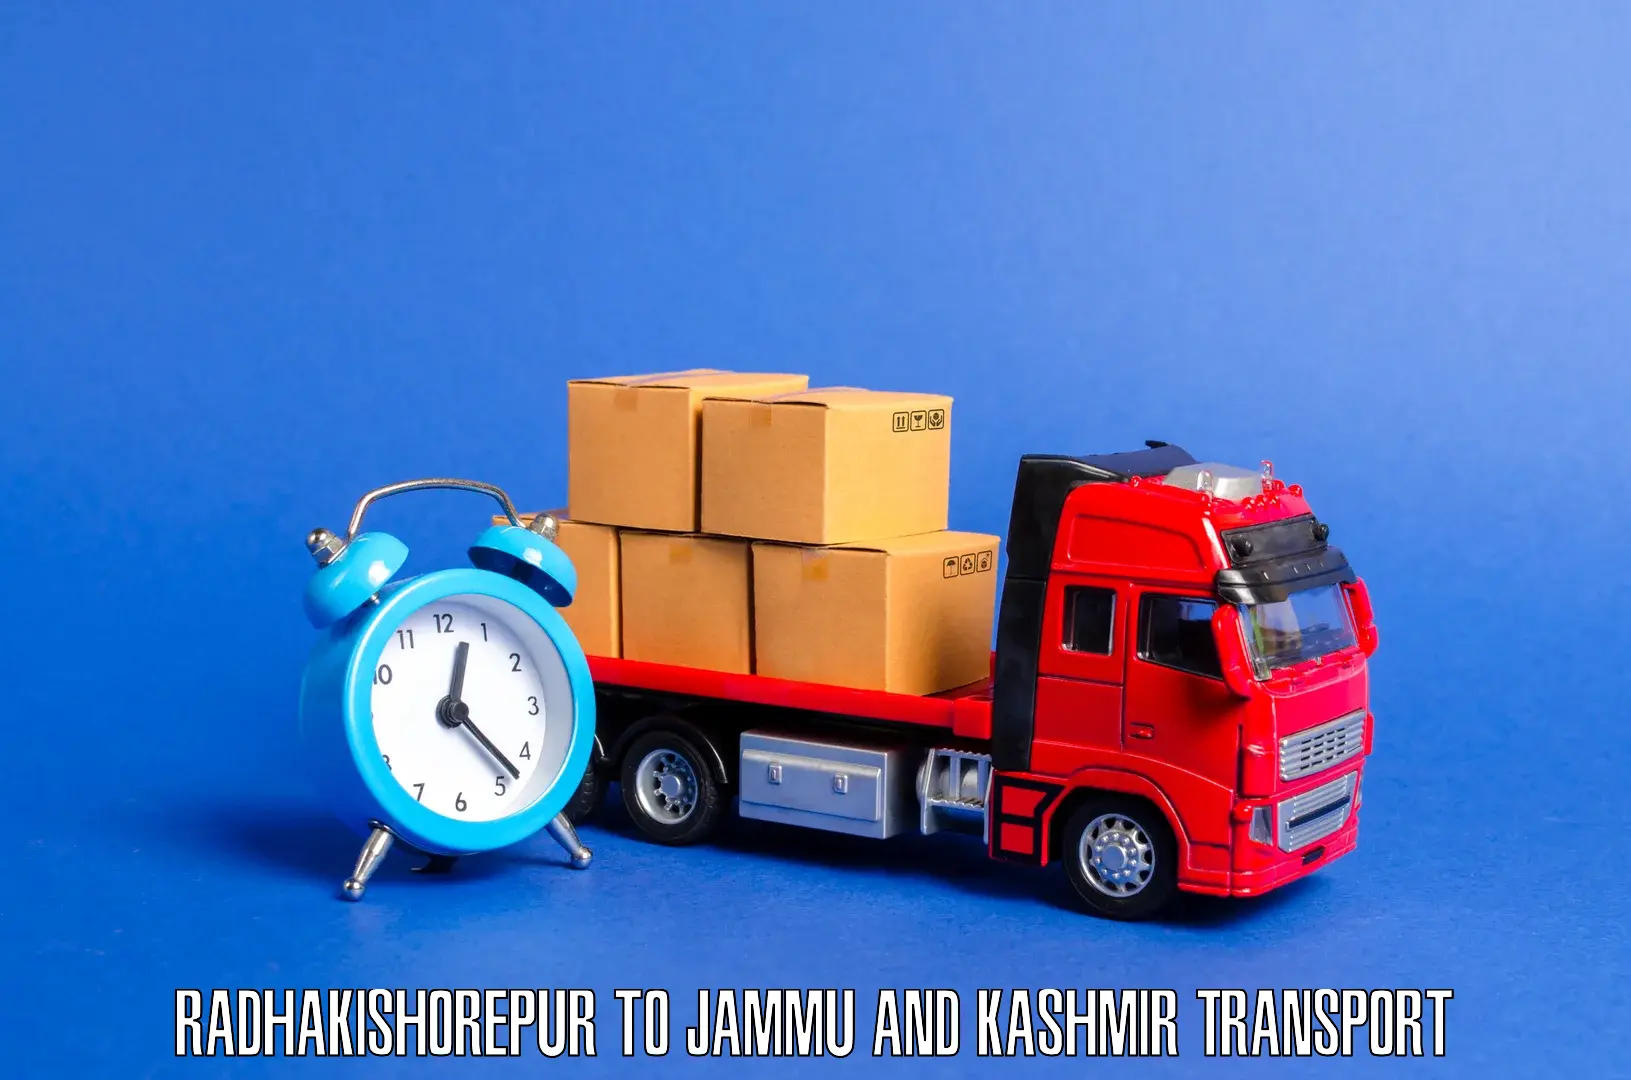 Transport bike from one state to another Radhakishorepur to Baramulla